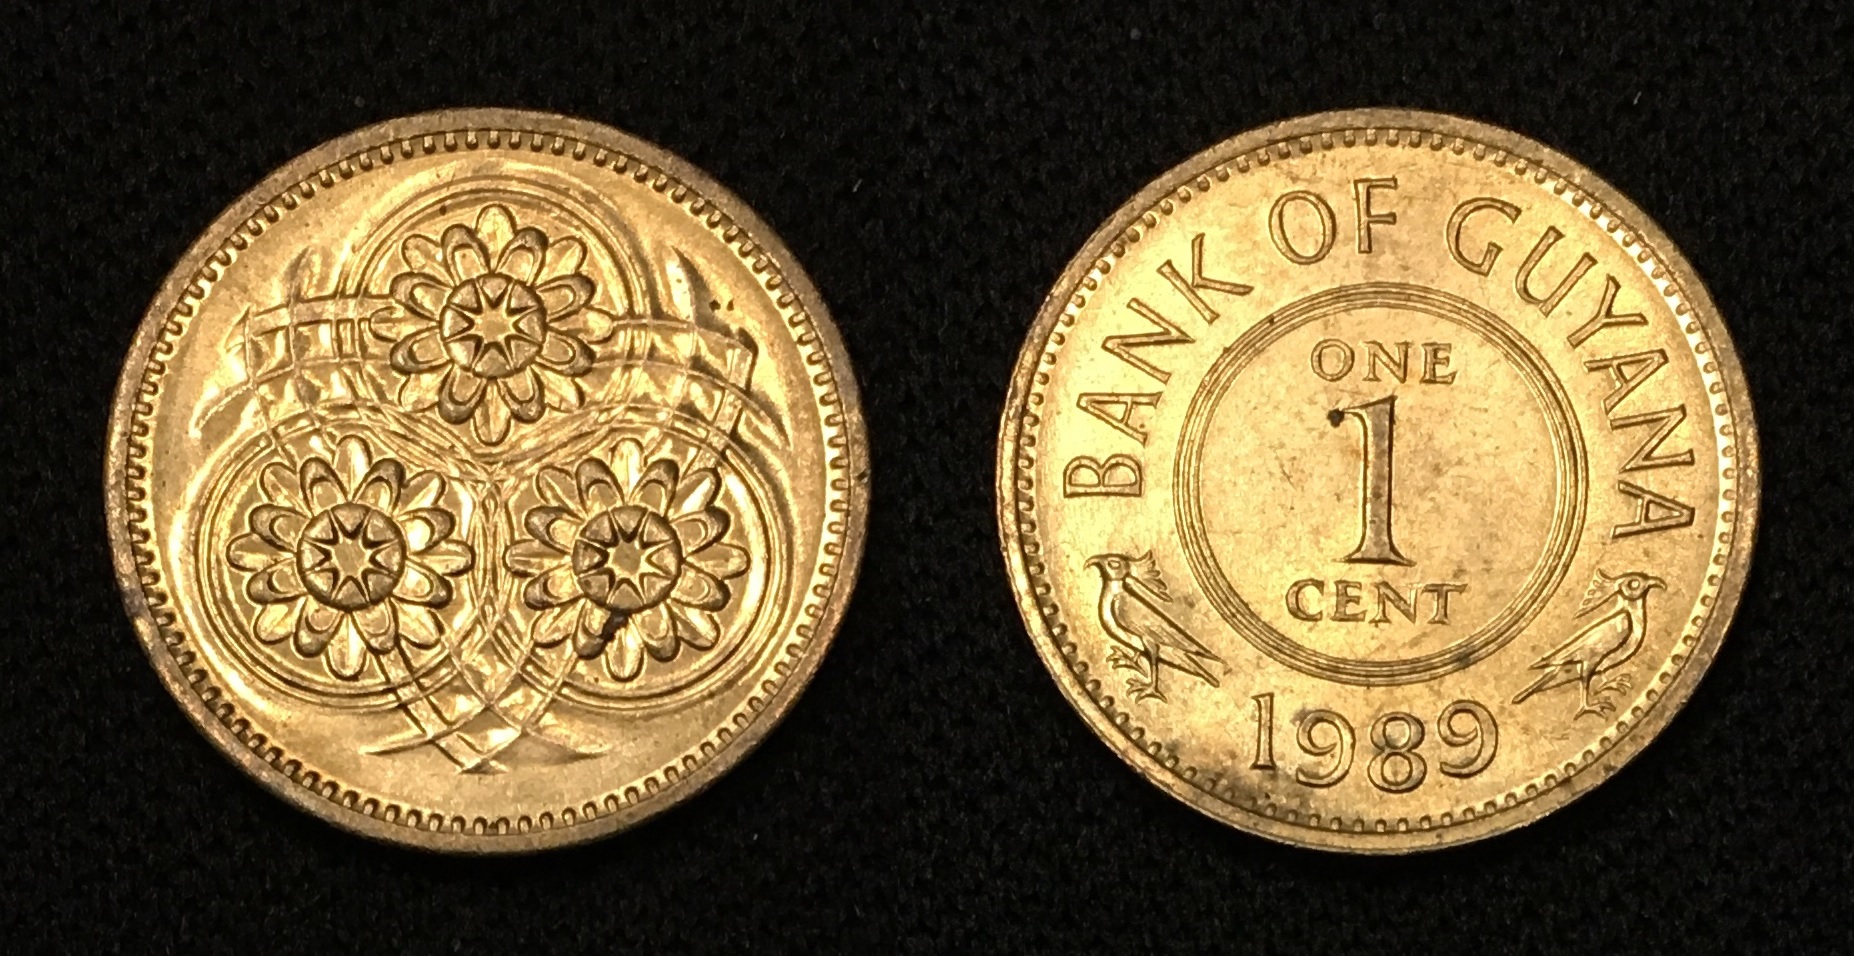 1989 CE 1 Cent S1 Combined.jpg